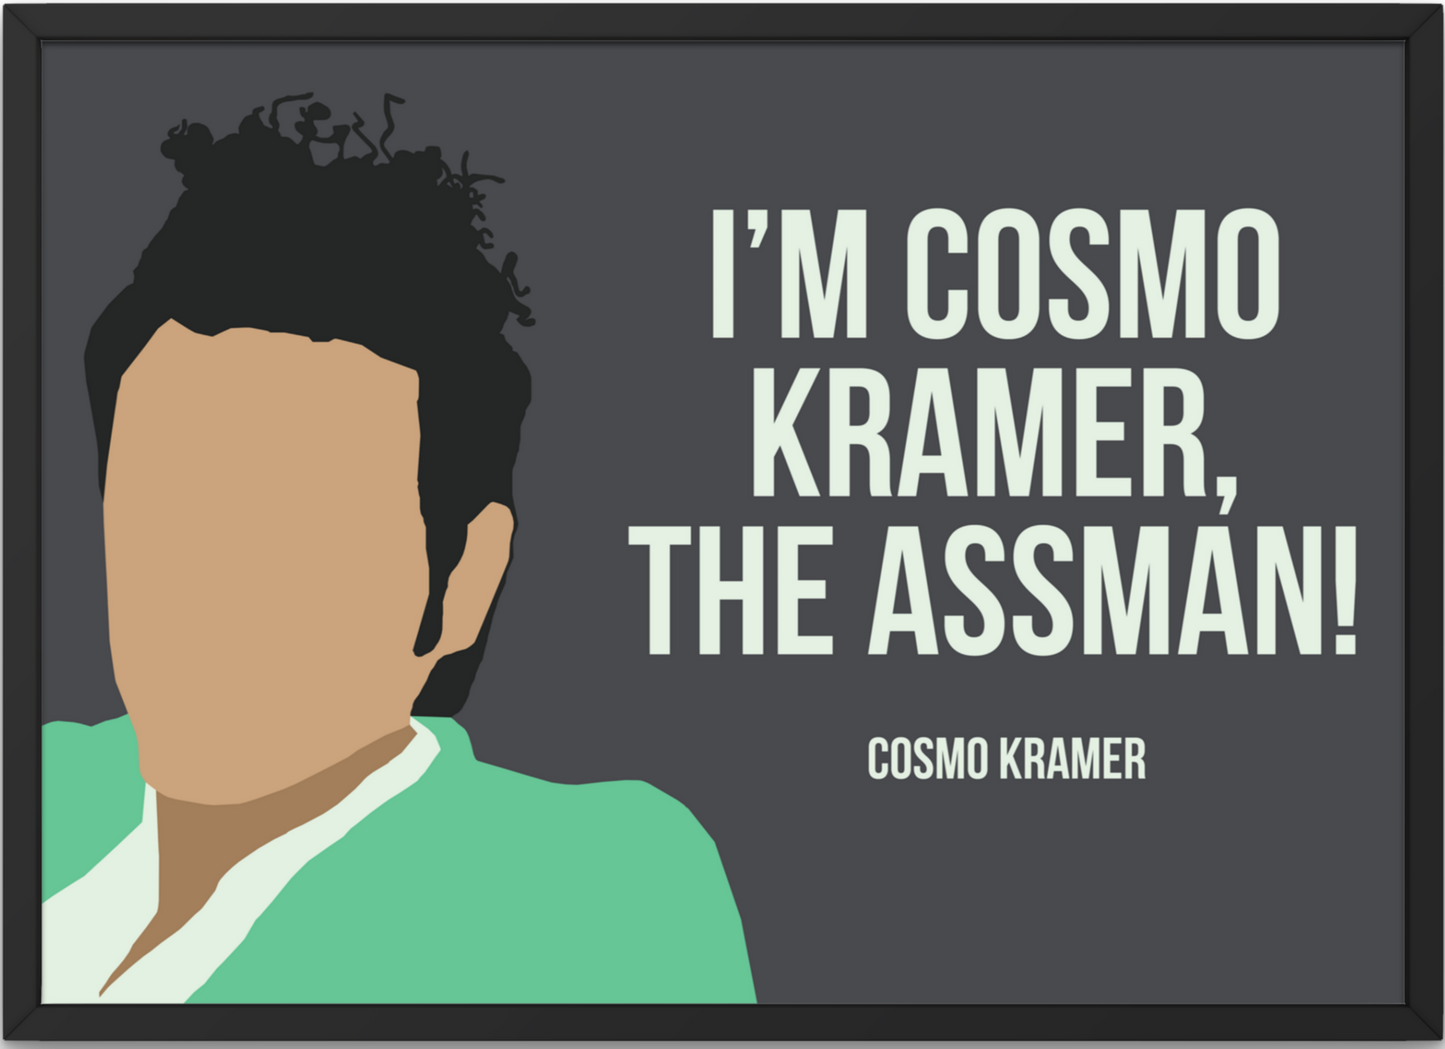 Seinfeld Poster | Cosmo Kramer Quote - the Assman